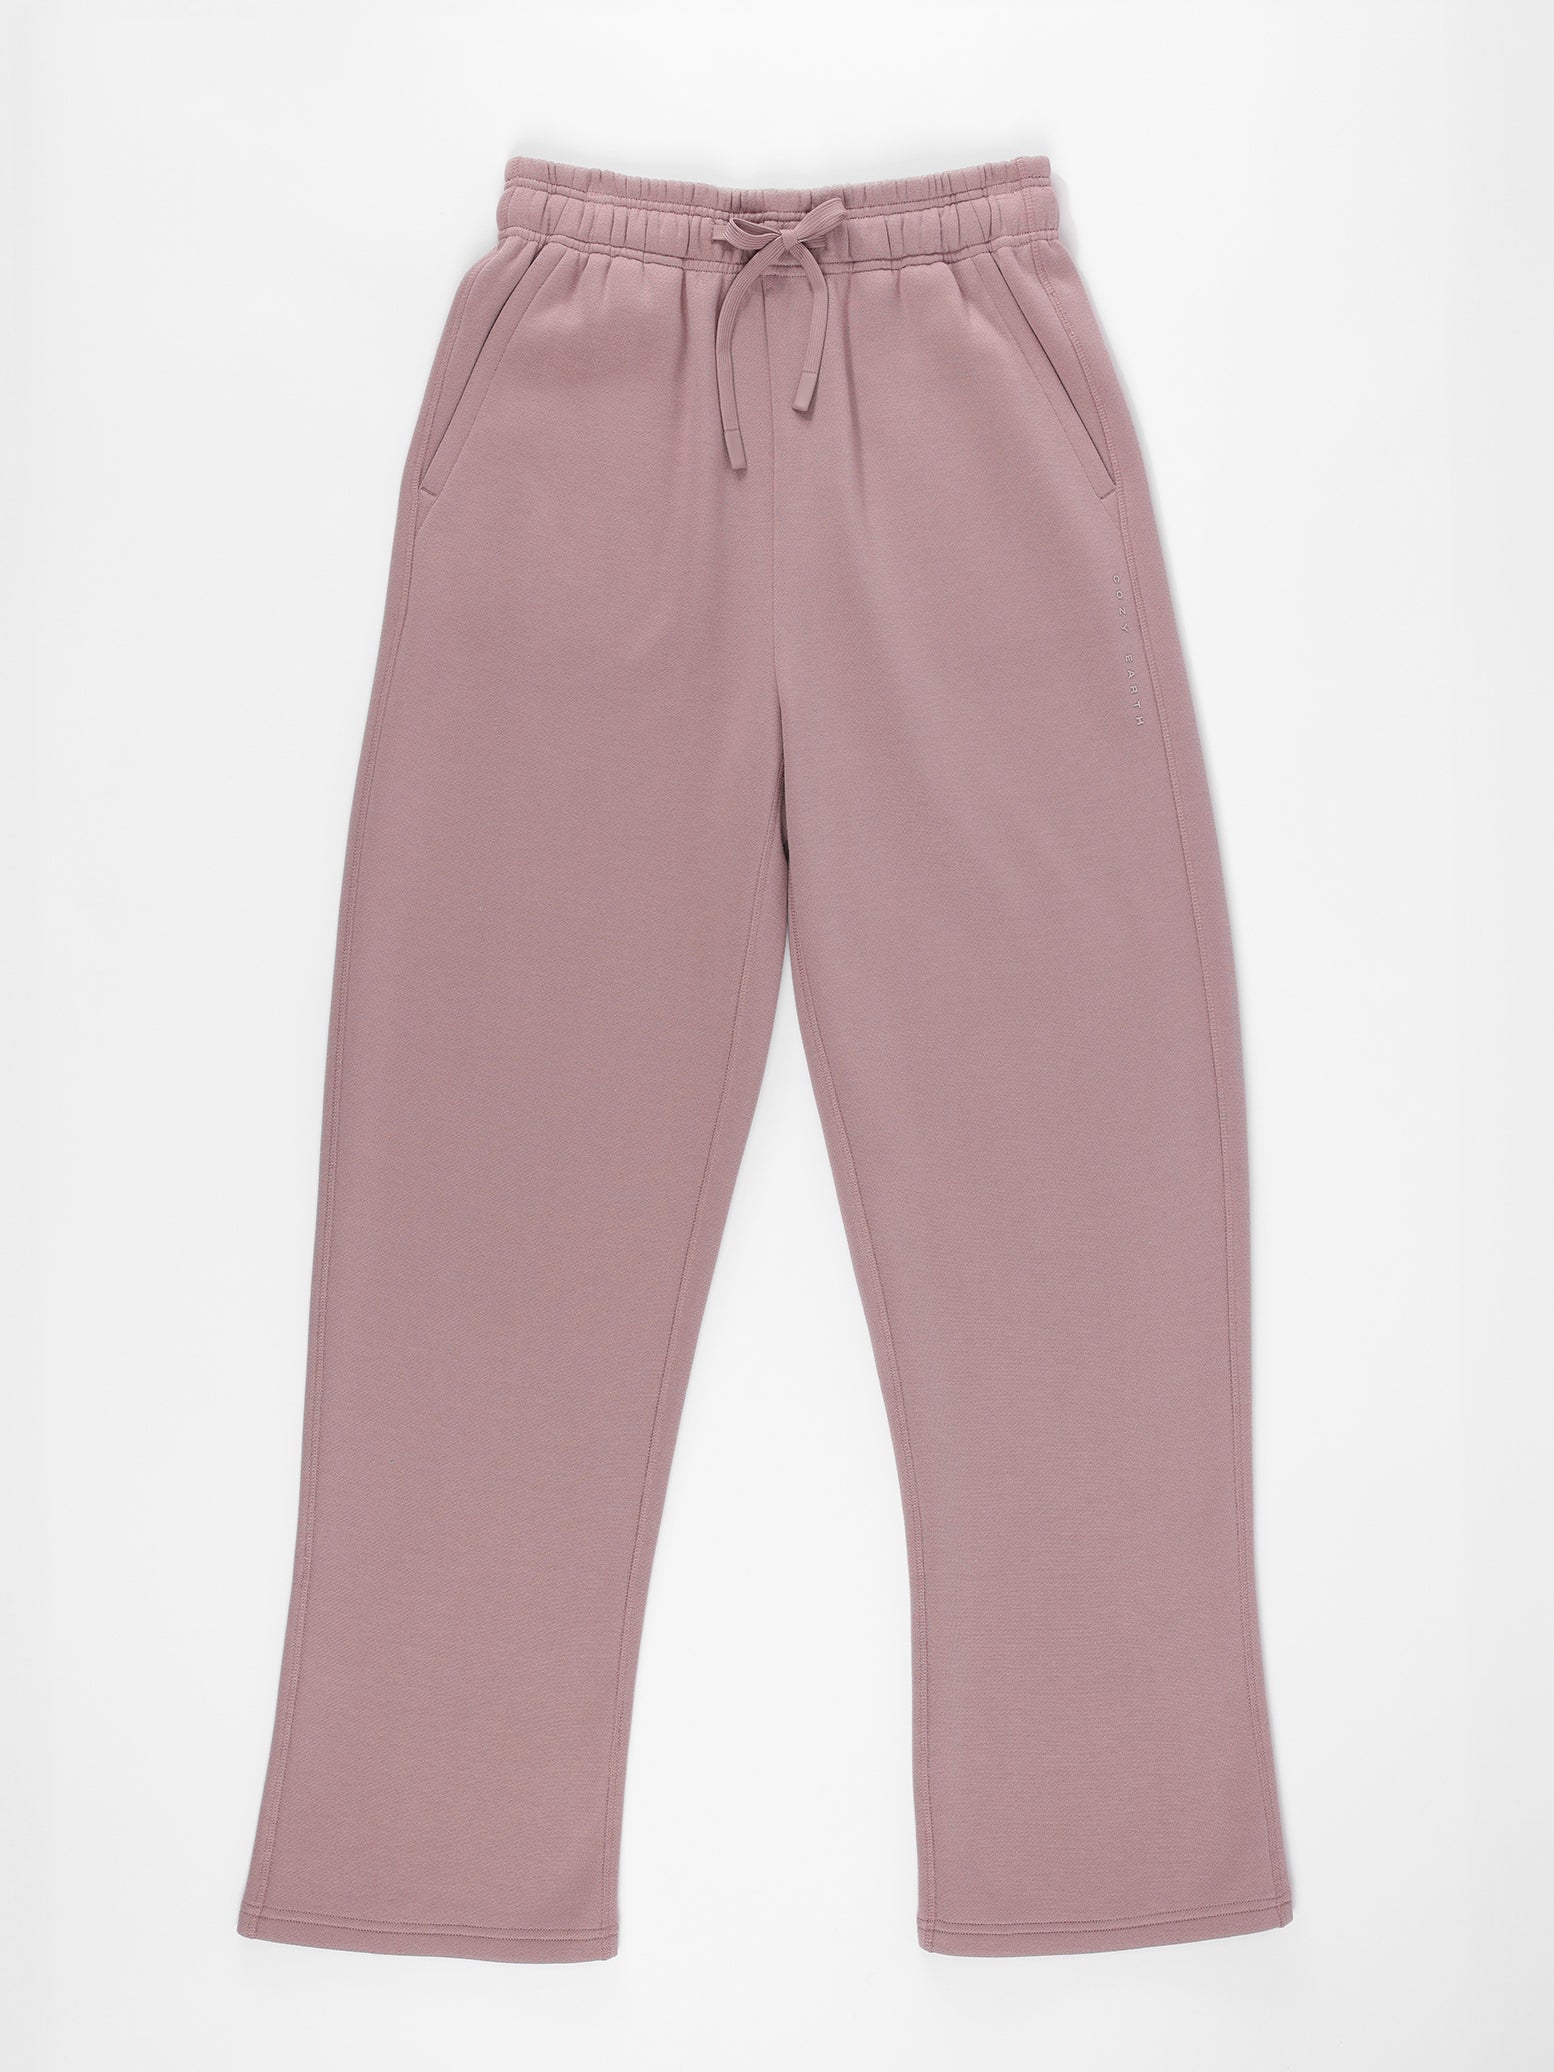 Dusty Orchid CityScape Wide Leg Pant with white background 